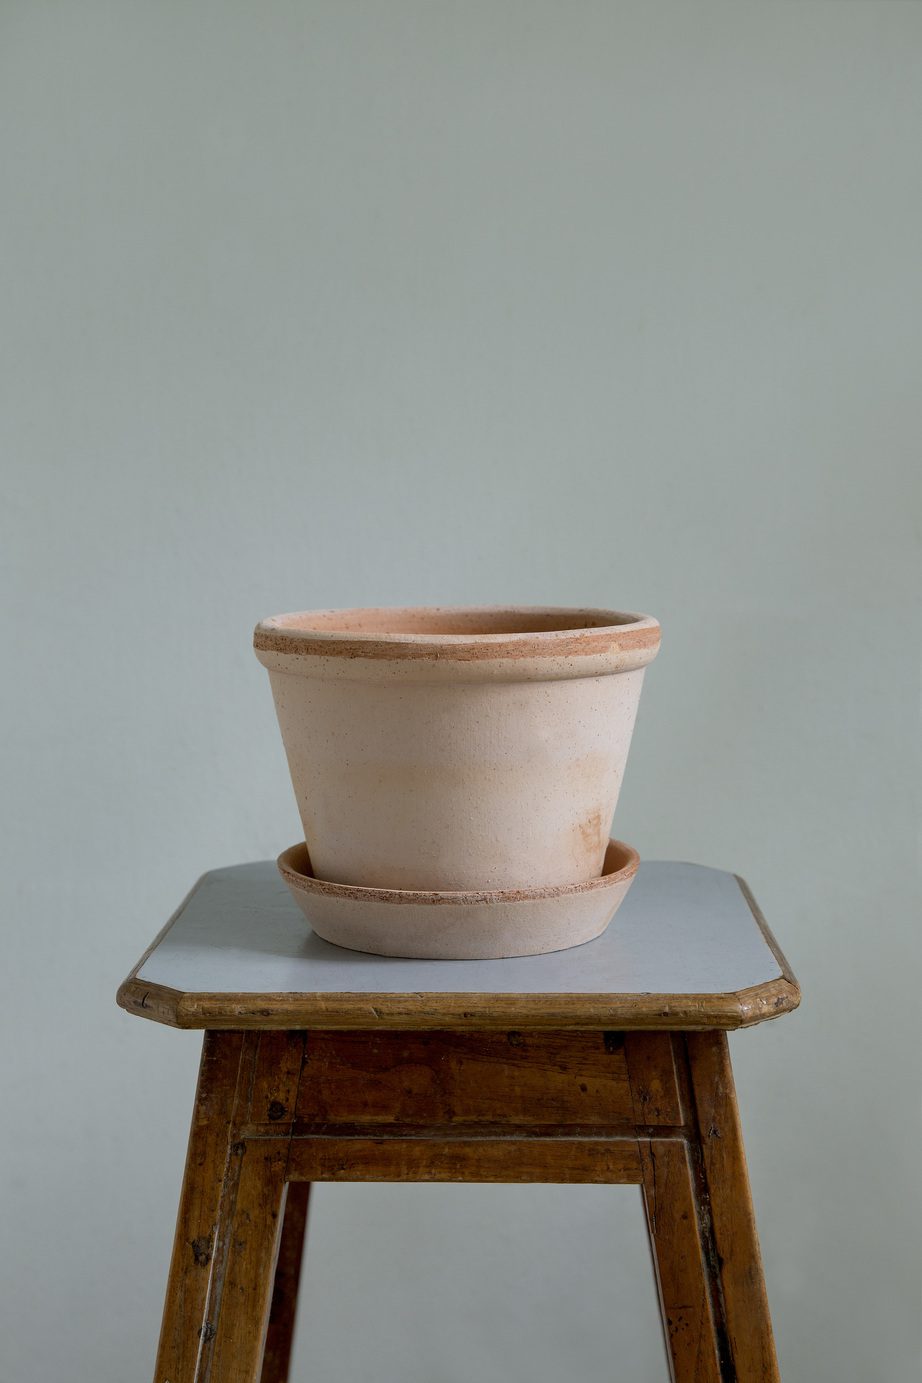 Raw rose terracotta pot with saucer on a stool.